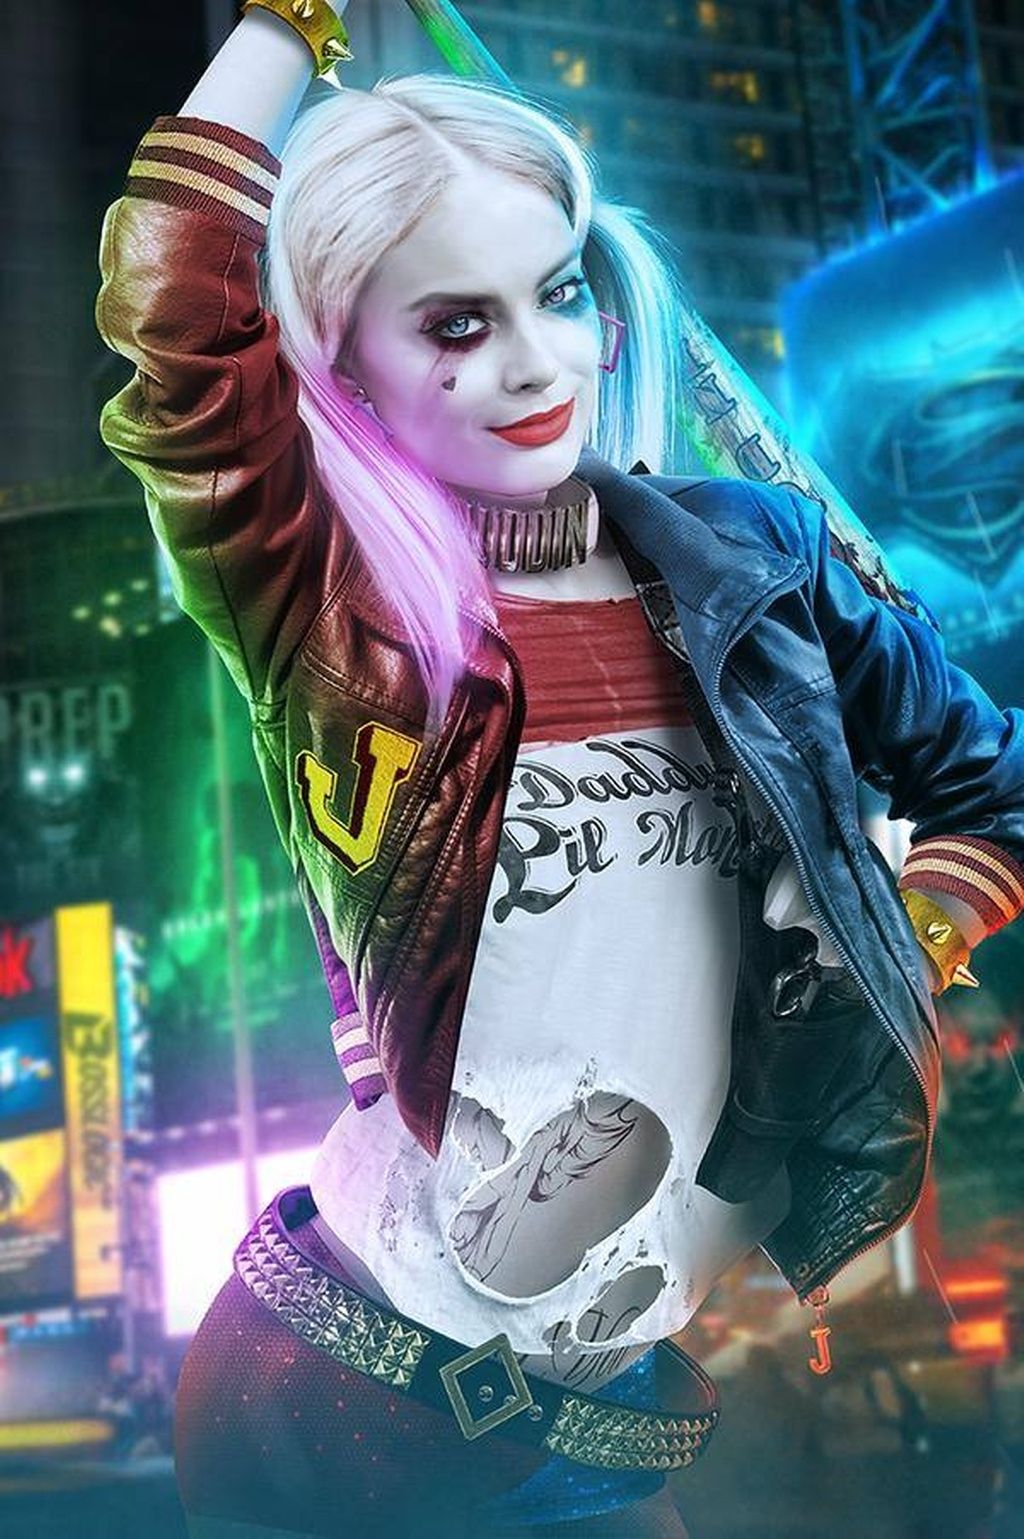 Suicide Squad Harley Quinn iPhone Wallpapers on WallpaperDog